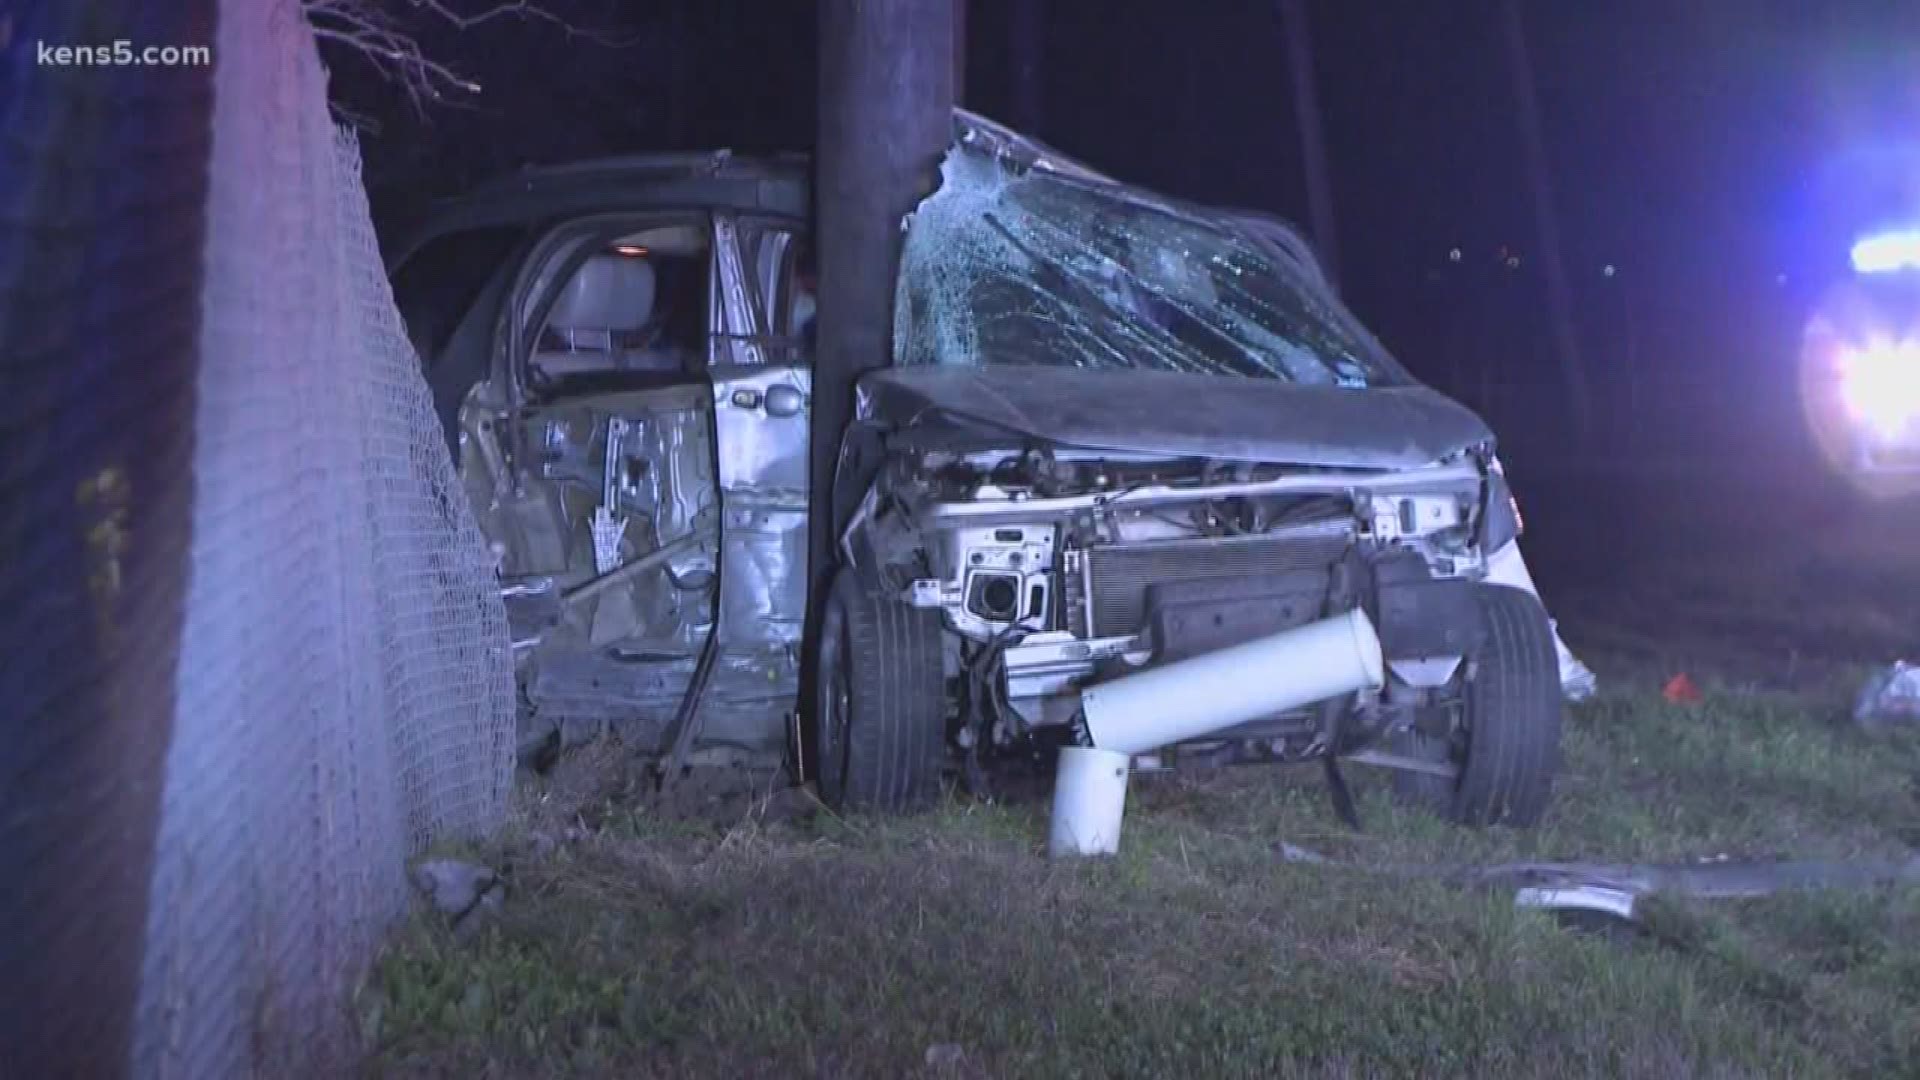 An early morning drive ended with a car wrapped around a utility pole and a driver in the hospital in serious condition.